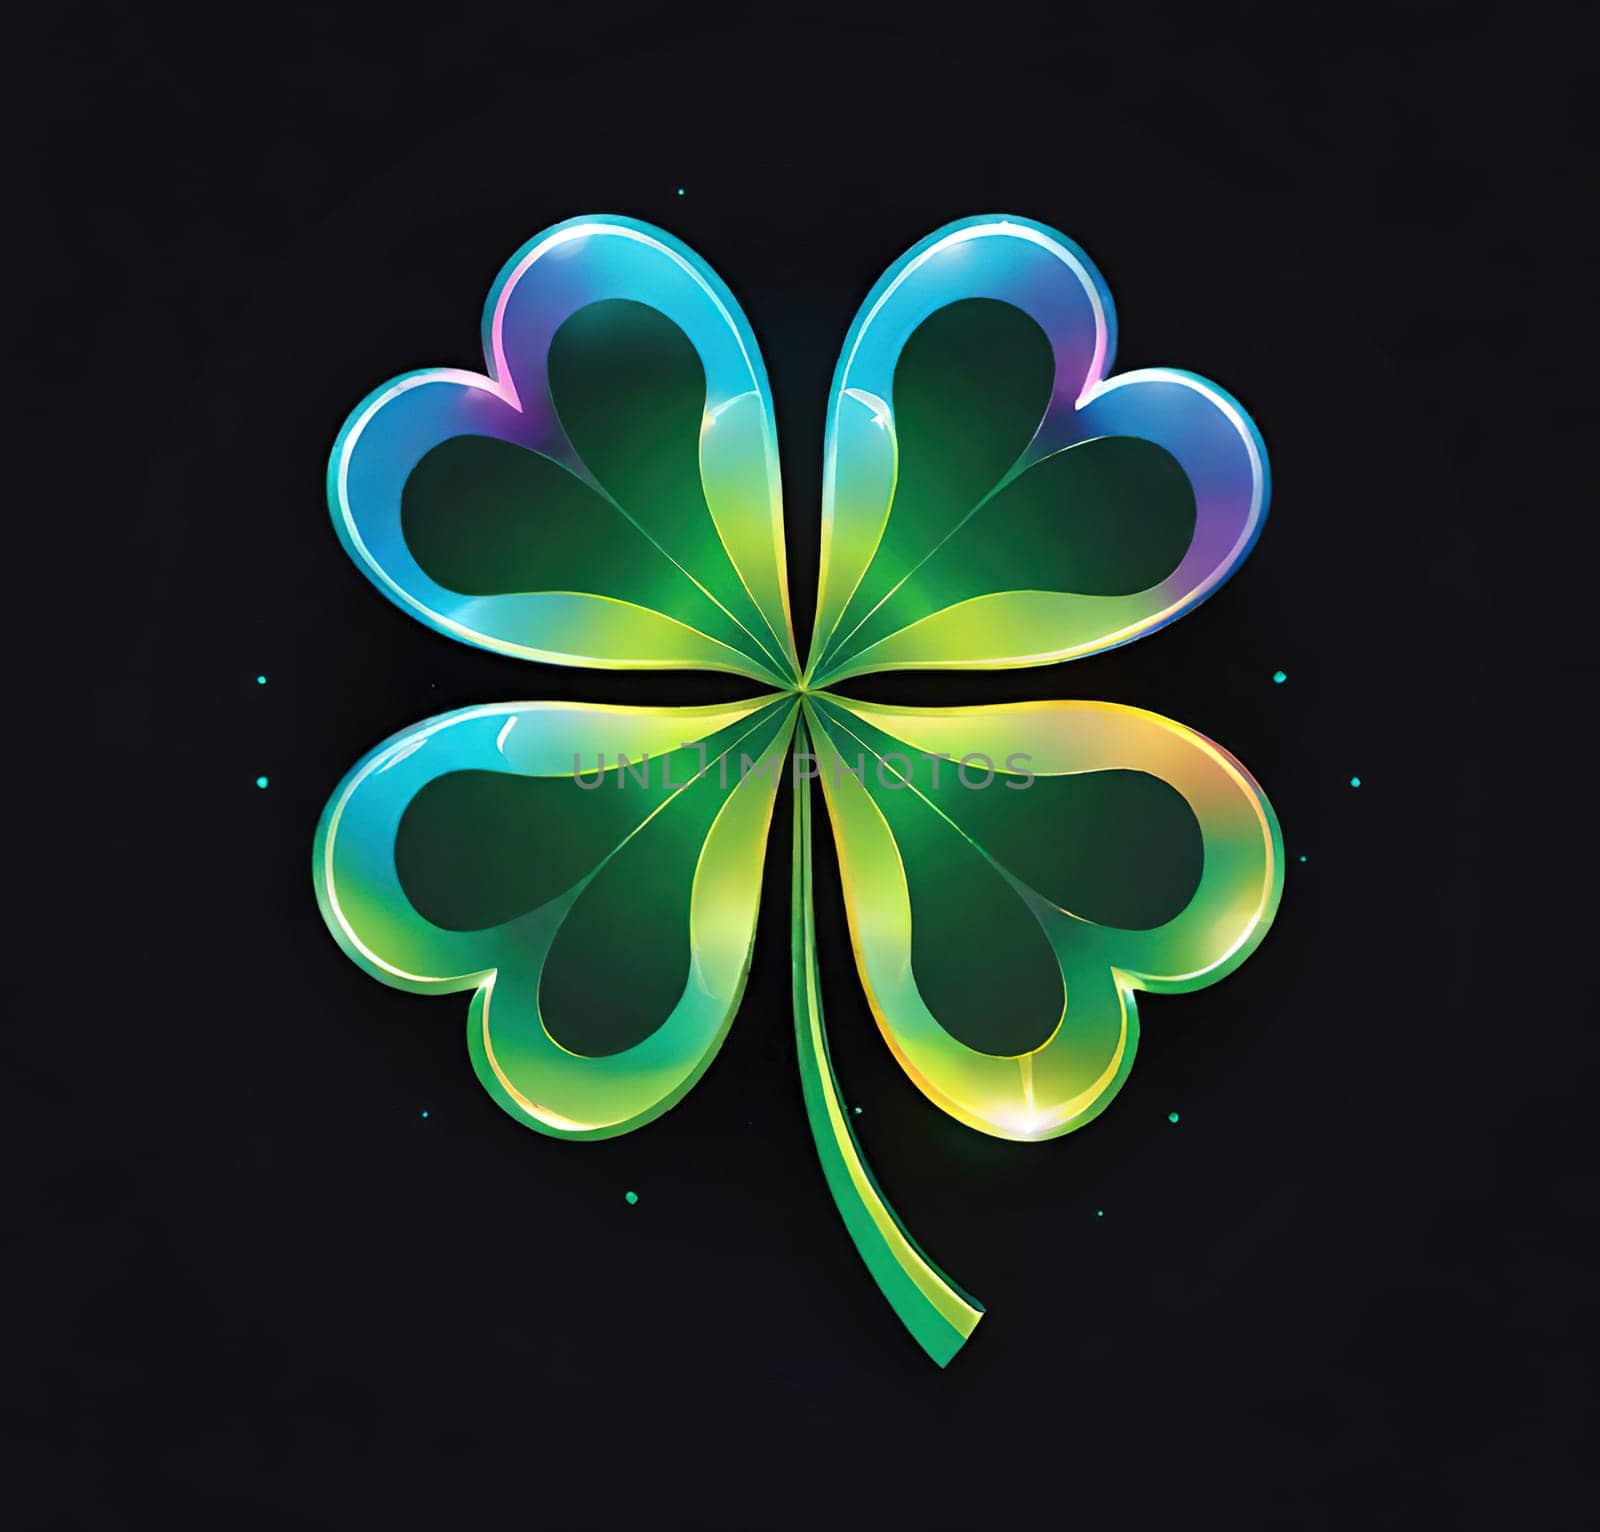 Illustration of a clover .Shamrock. Background with clover leaves. St. Patrick's Day.Illustration of a four-leaf clover. Abstract background with clover.Glowing green shamrock.